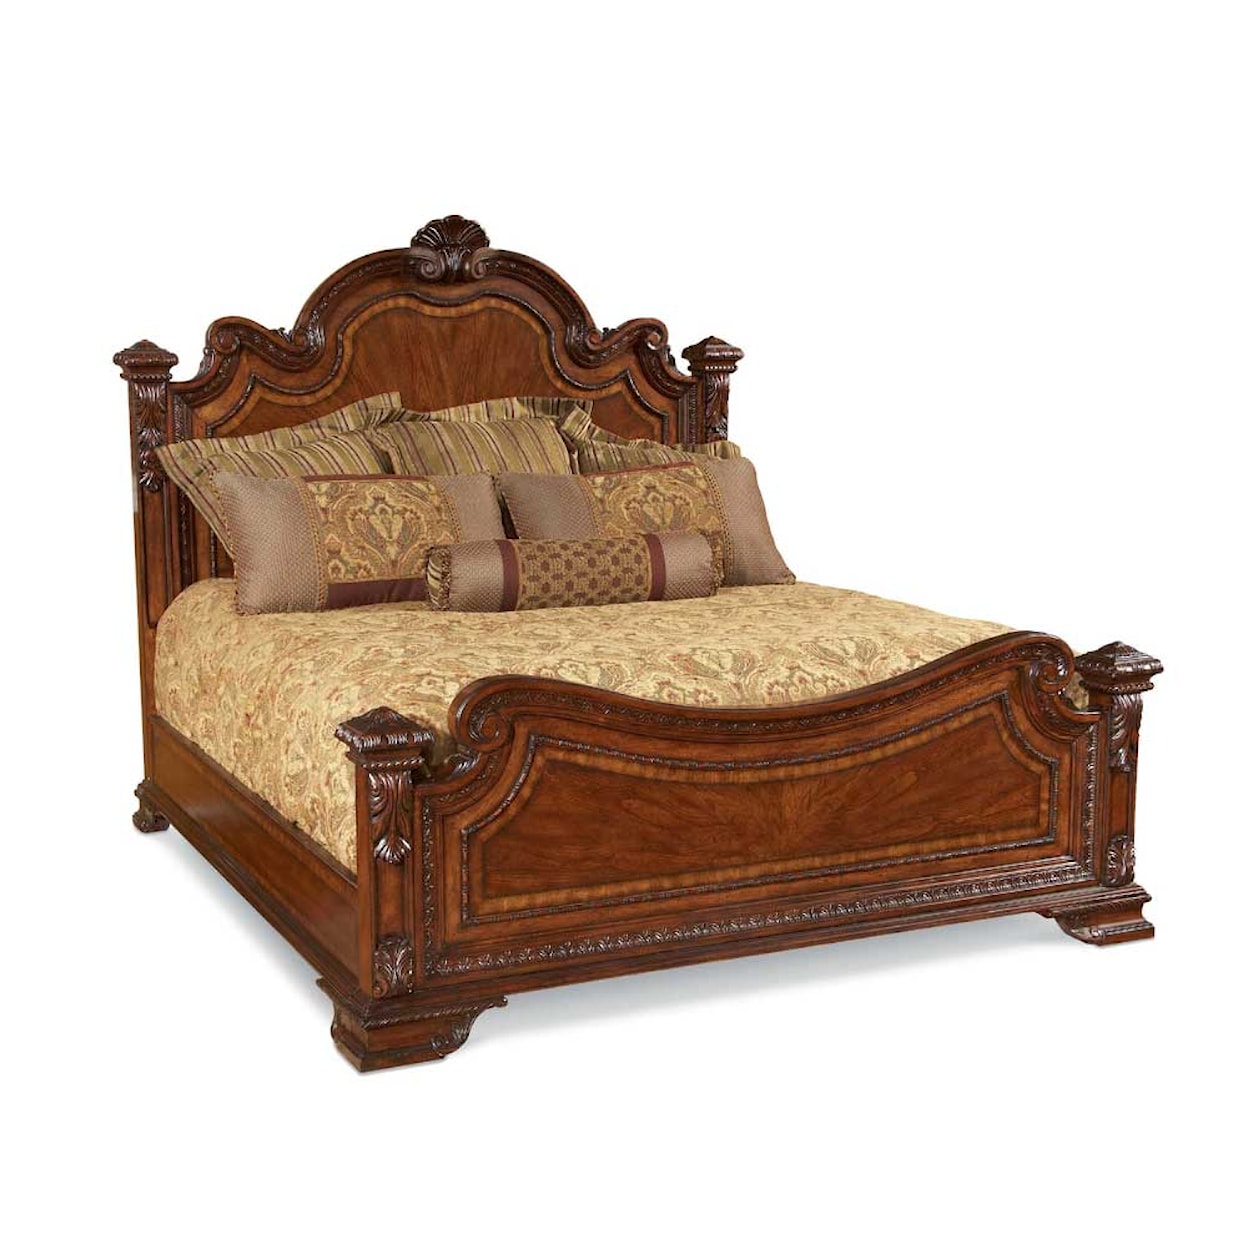 A.R.T. Furniture Inc Old World California King Estate Bed